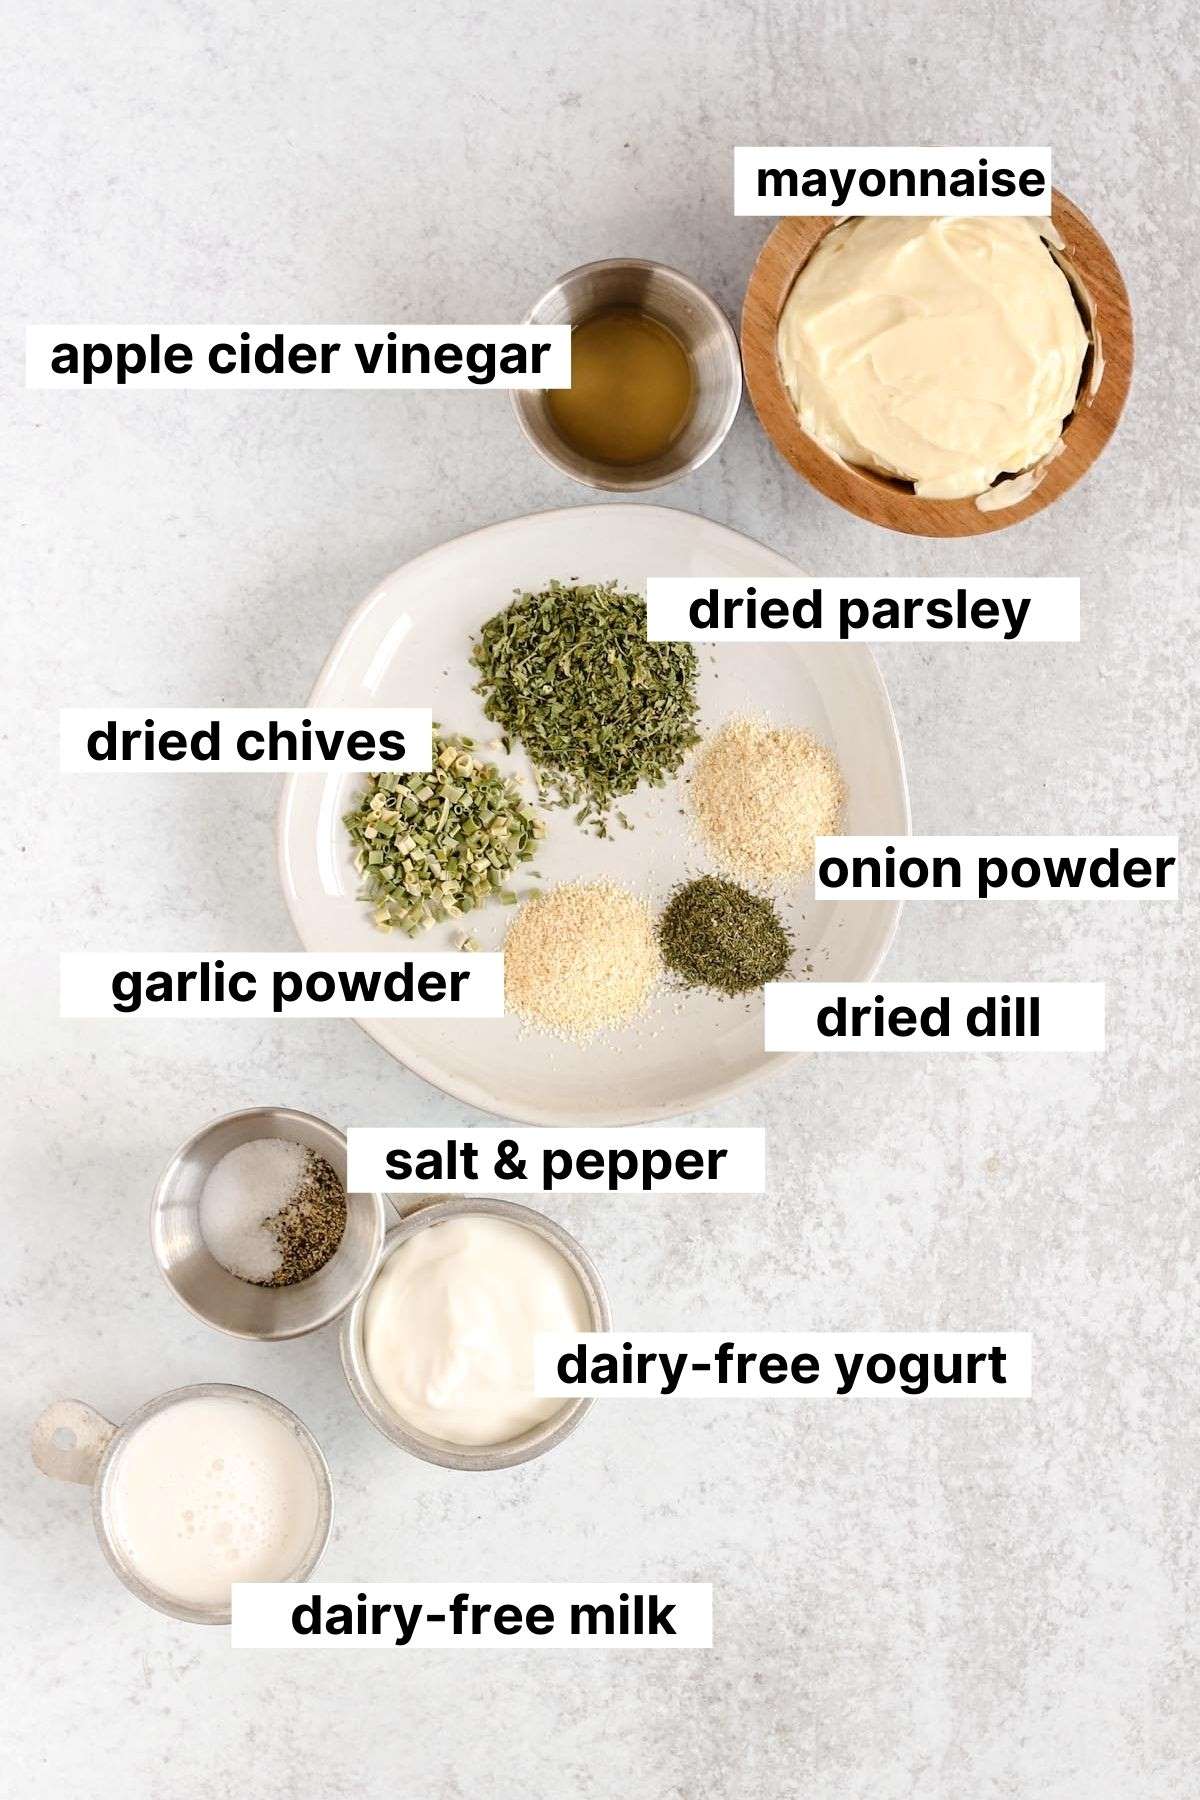 Labeled ingredients used to make dairy-free ranch dressing.